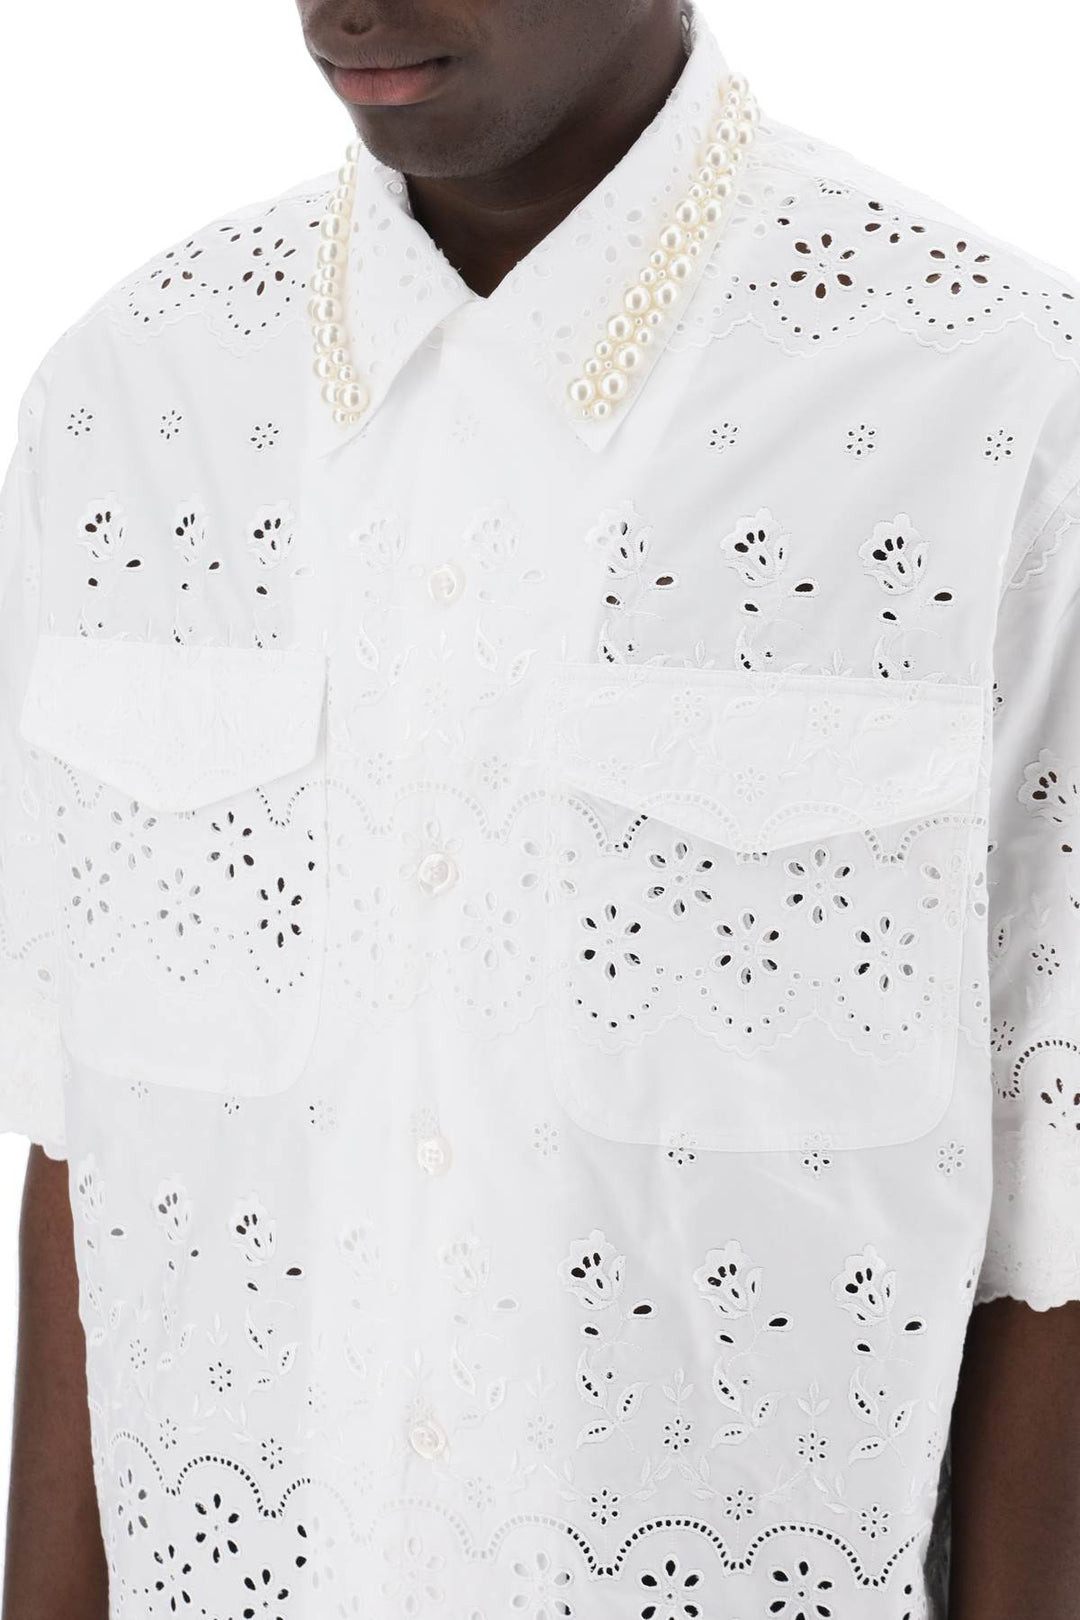 Simone Rocha Scalloped Lace Shirt With Pearls   Bianco